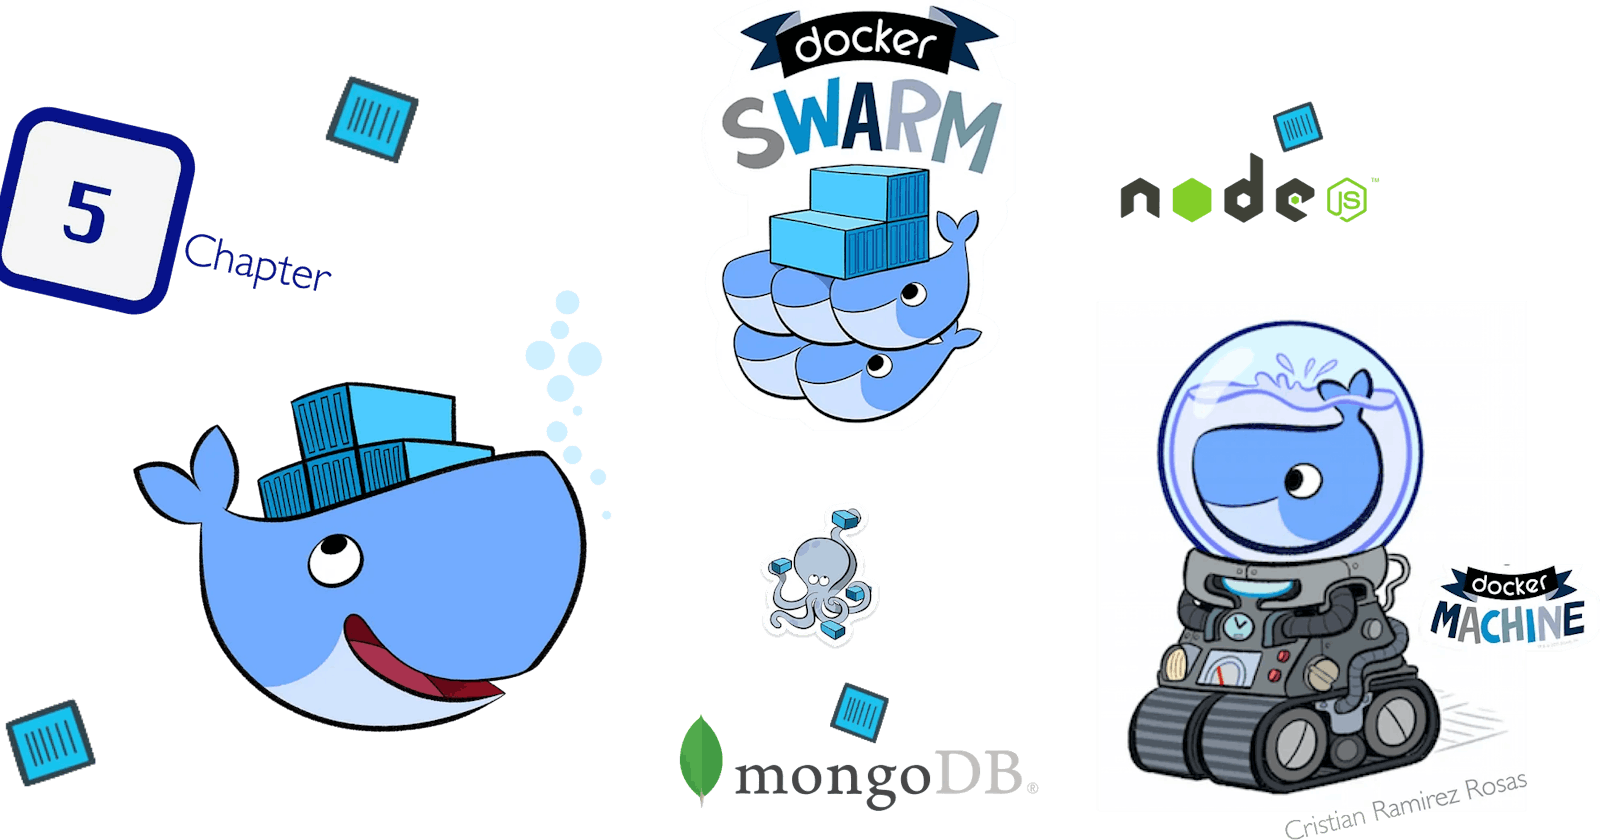 Docker Swarm and Microservices